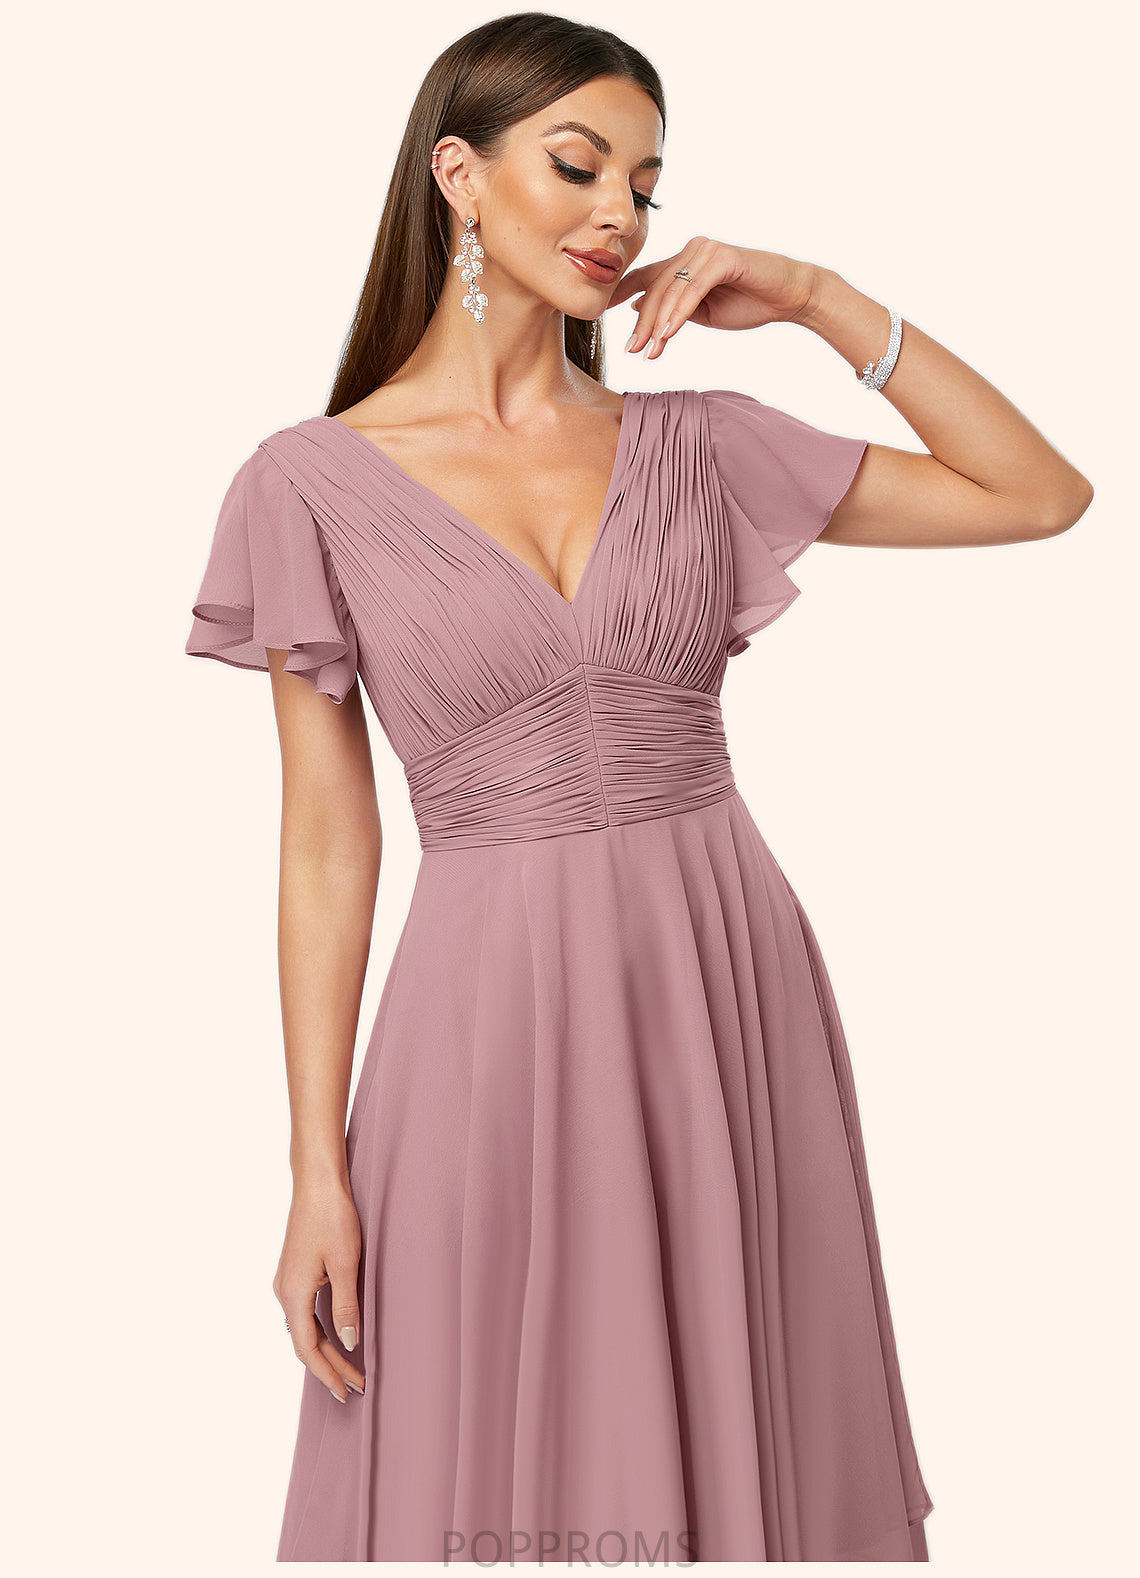 Alayna A-line V-Neck Ankle-Length Chiffon Cocktail Dress With Ruffle PP6P0022486